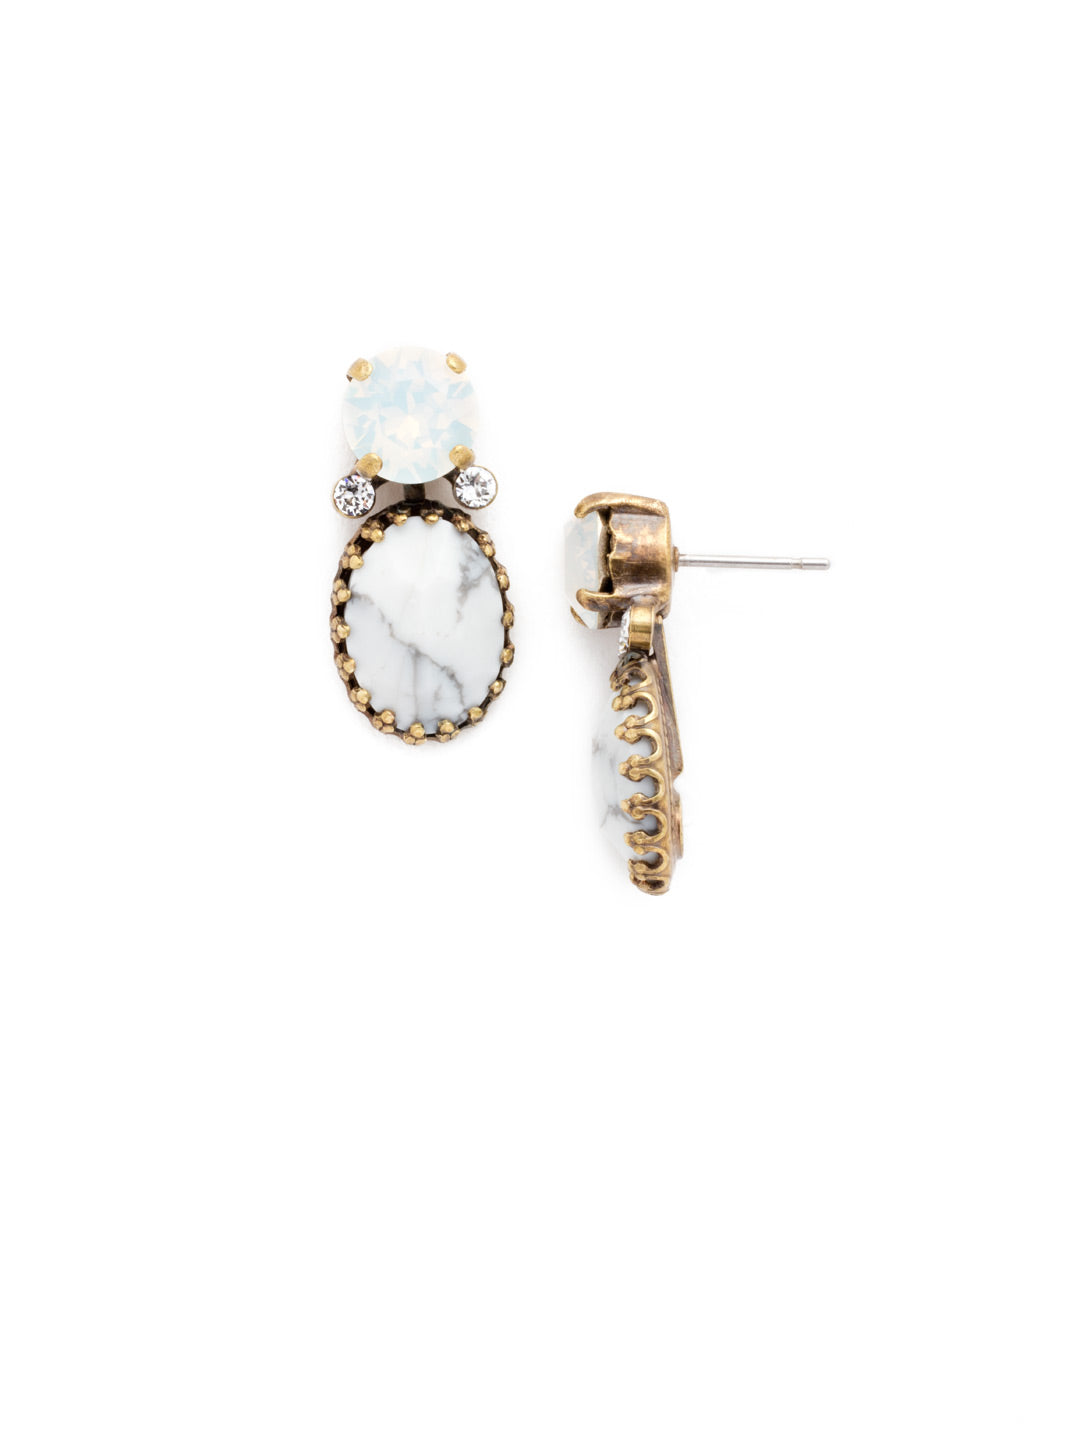 Semi-Precious Oval Accent Earring - EDE1AGPLU - A large semi-precious oval stone hanging from a round crystal post make these earrings perfect for any occasion.